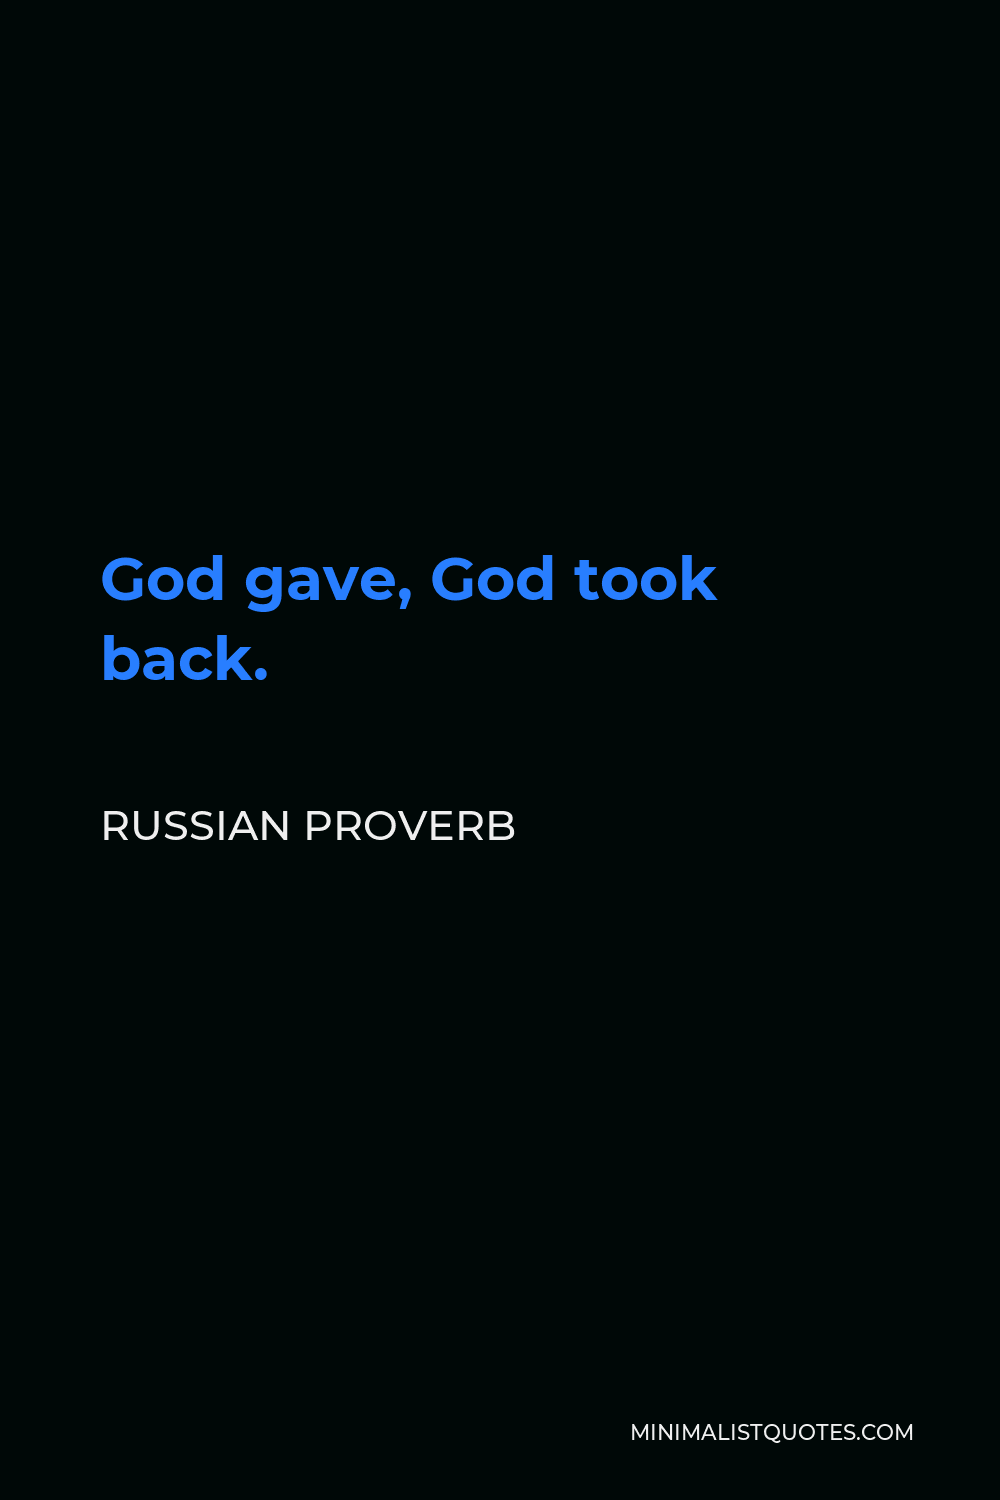 Russian Proverb Quote - God gave, God took back.